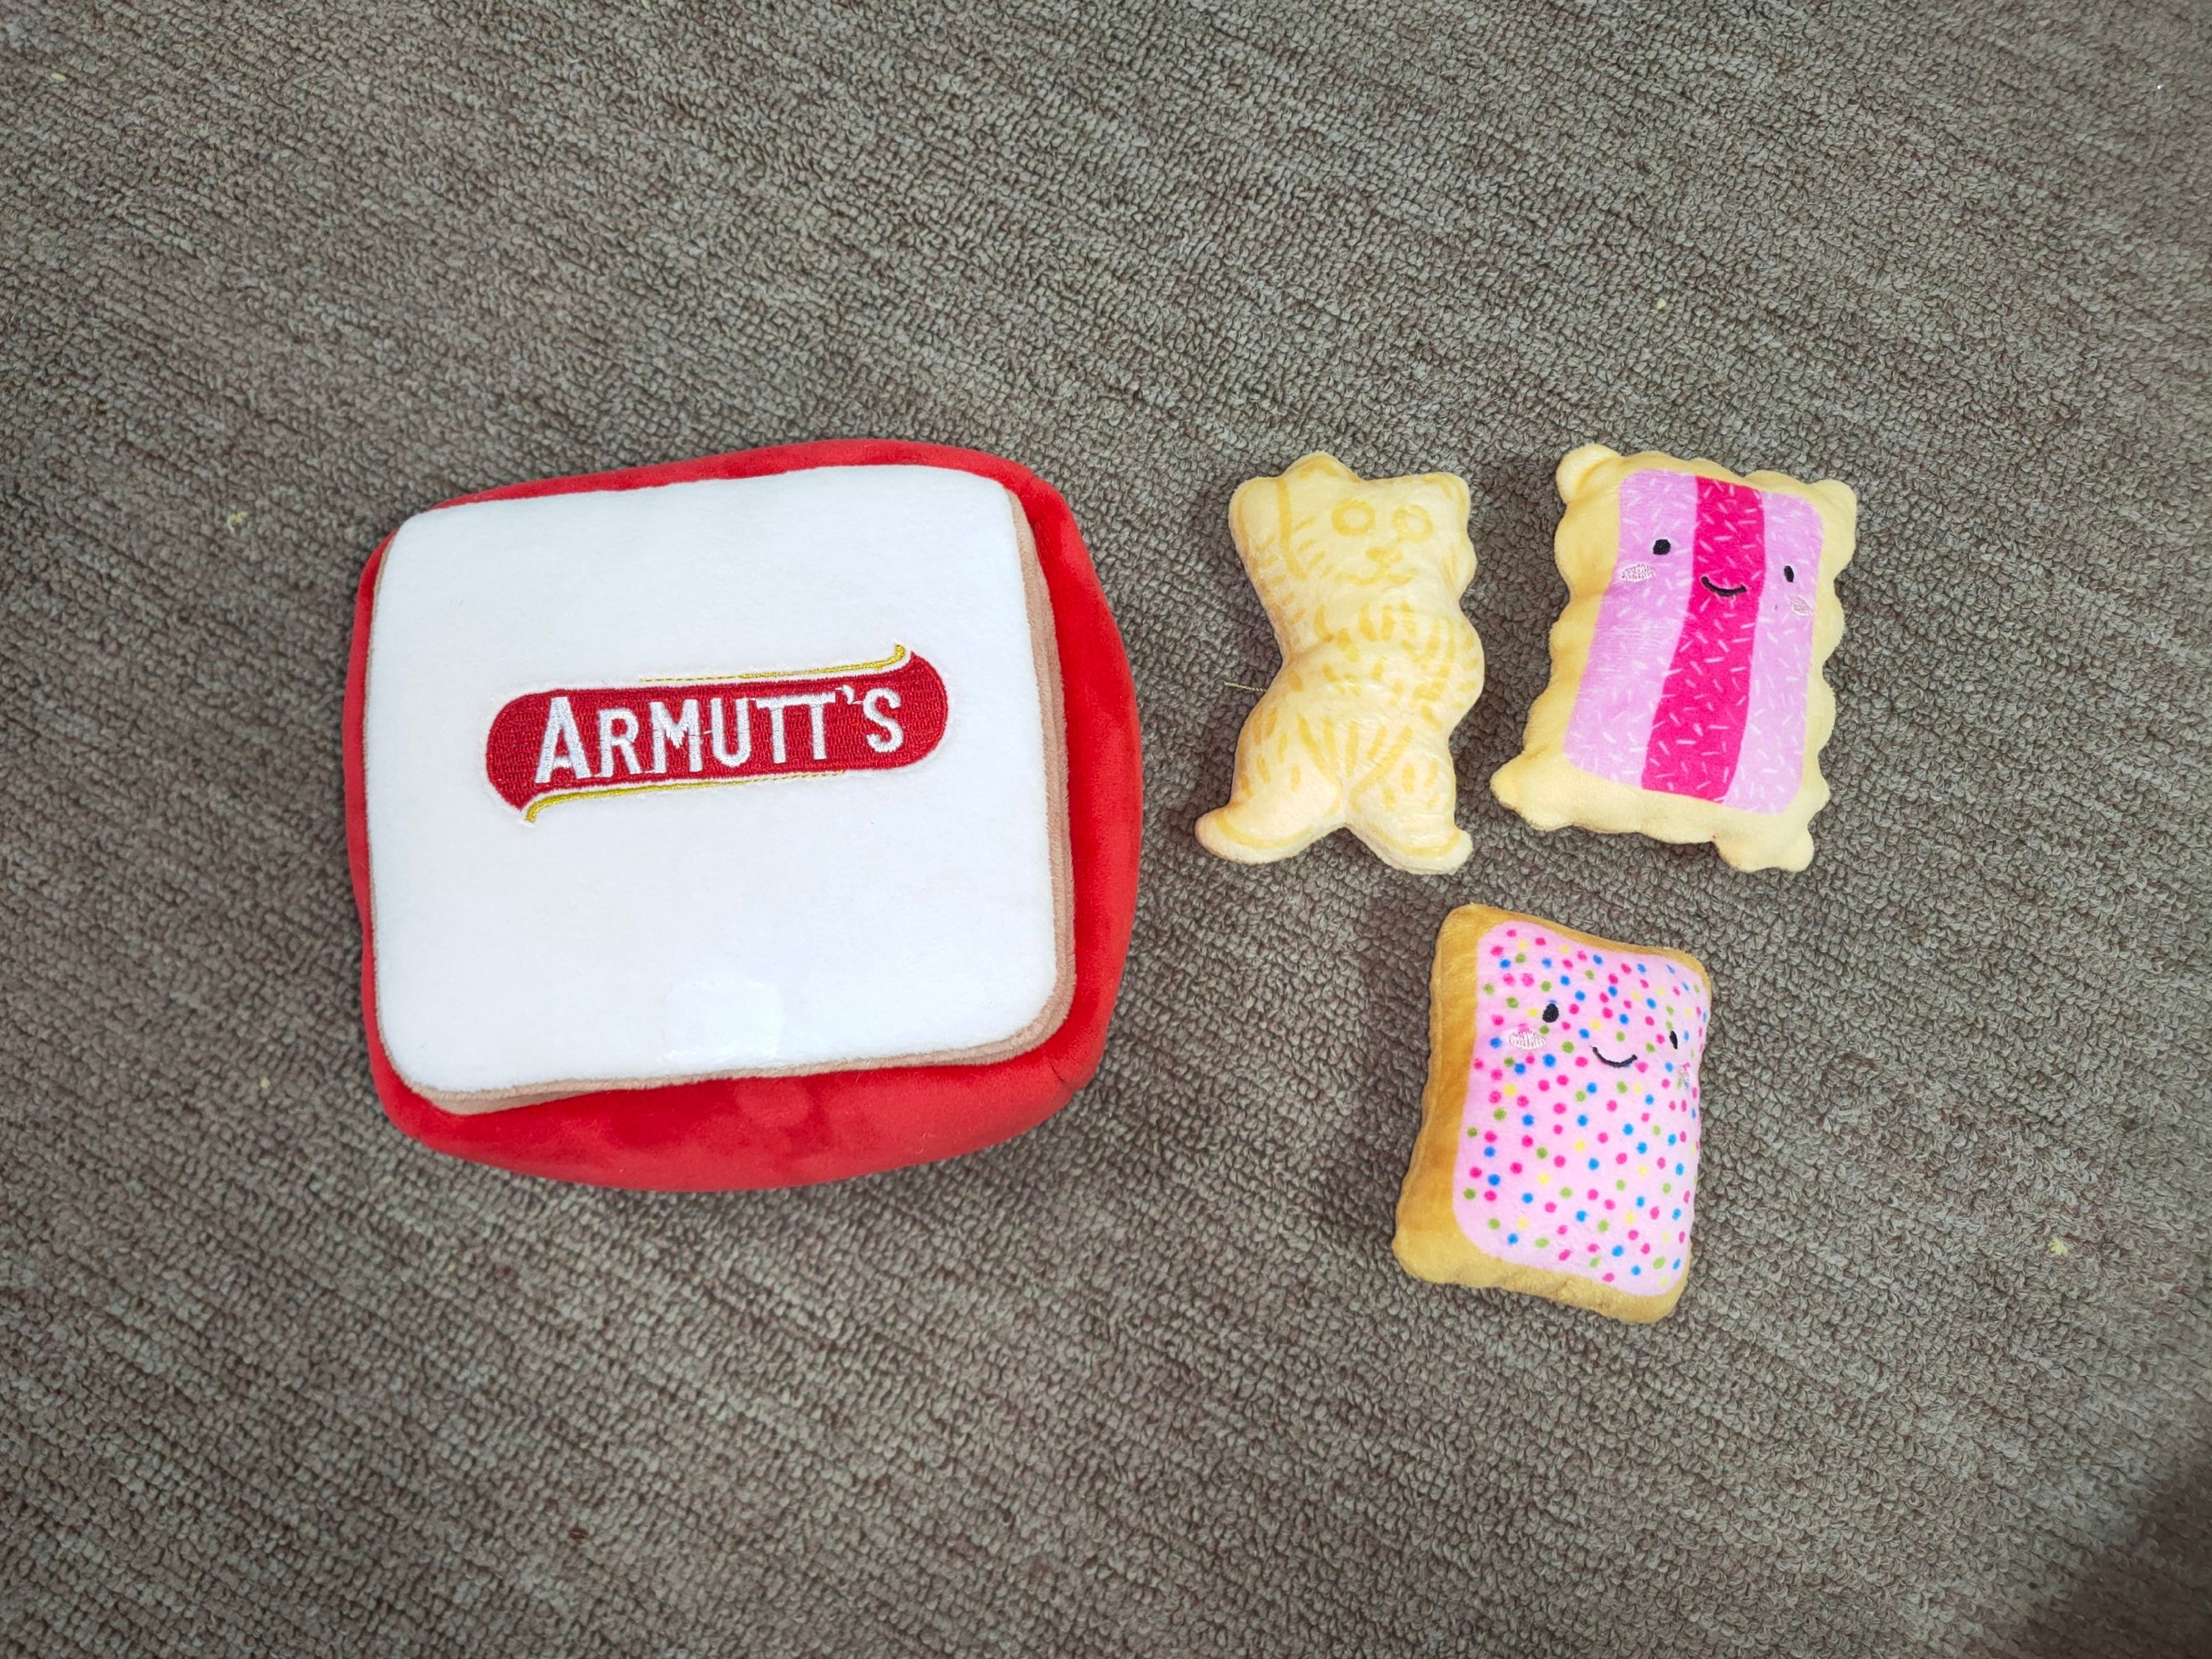 TWOMOODLES BURROW TOY - ARMUTTS BISCUITS